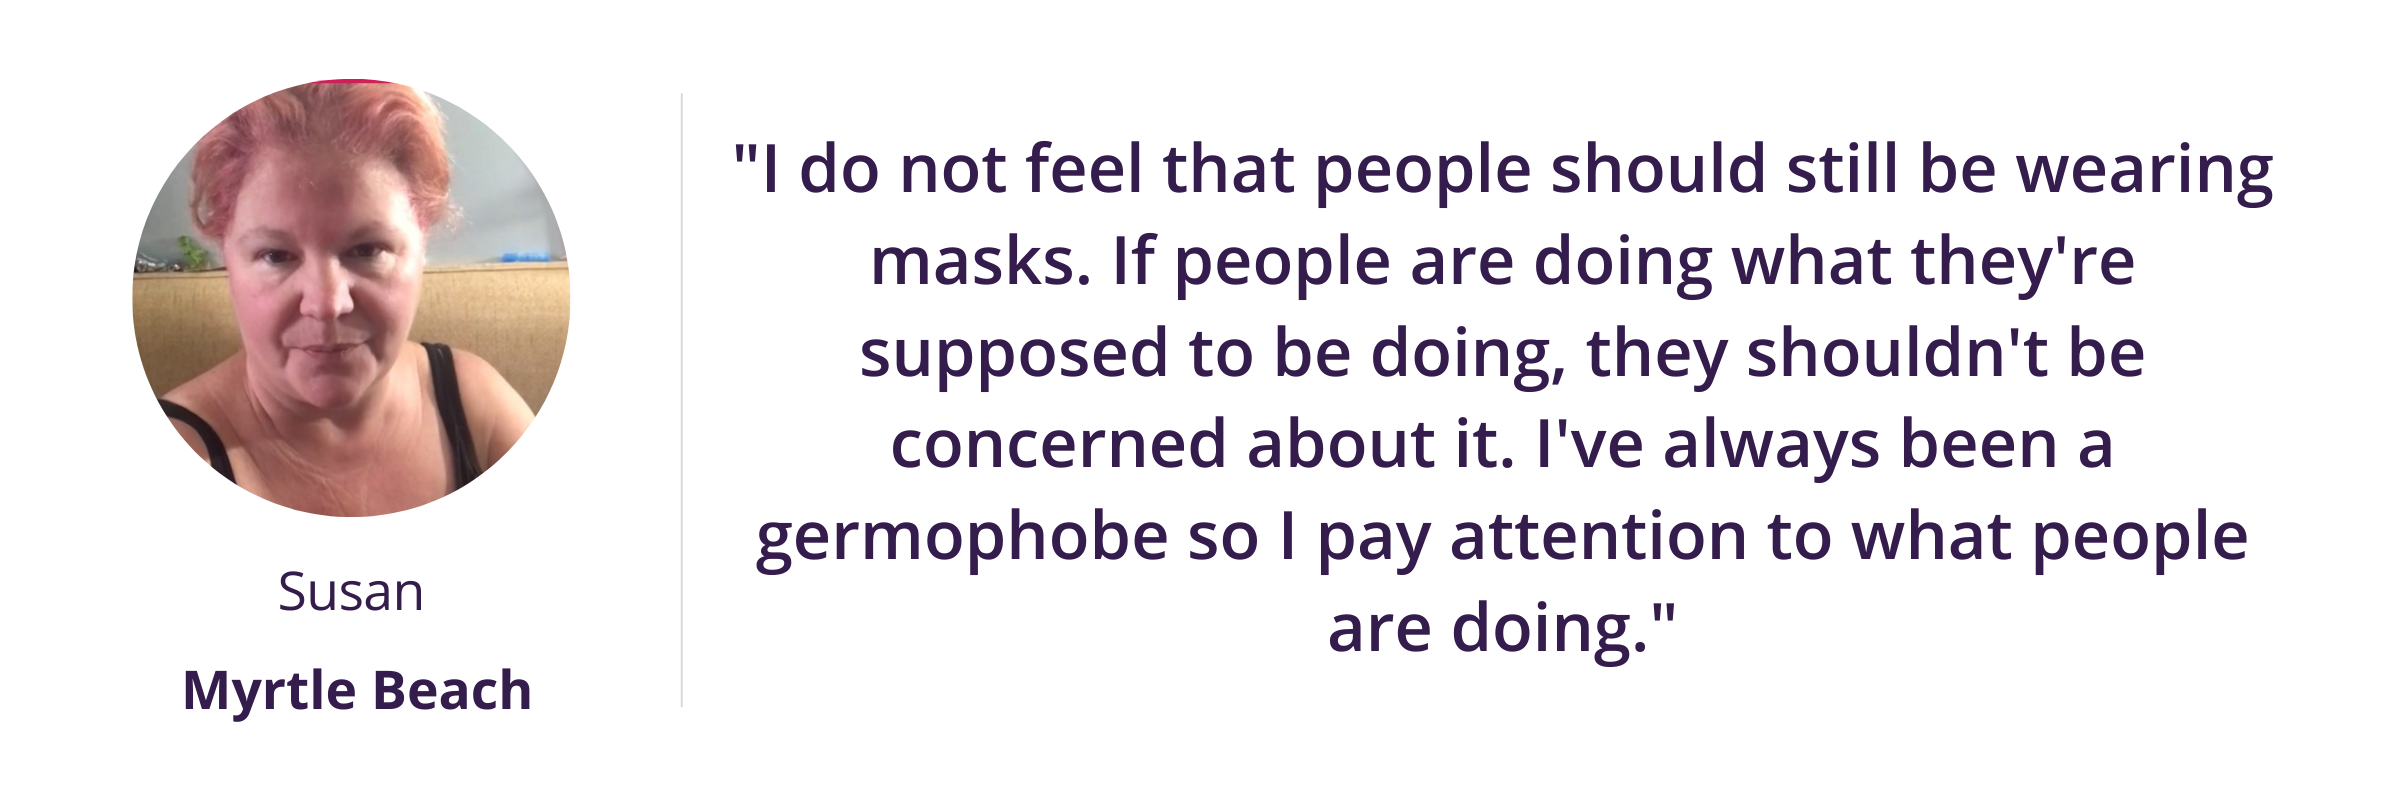 "I do not feel that people should still be wearing masks. If people are doing what they're supposed to be doing, they shouldn't be concerned about it. I've always been a germophobe so I pay attention to what people are doing."